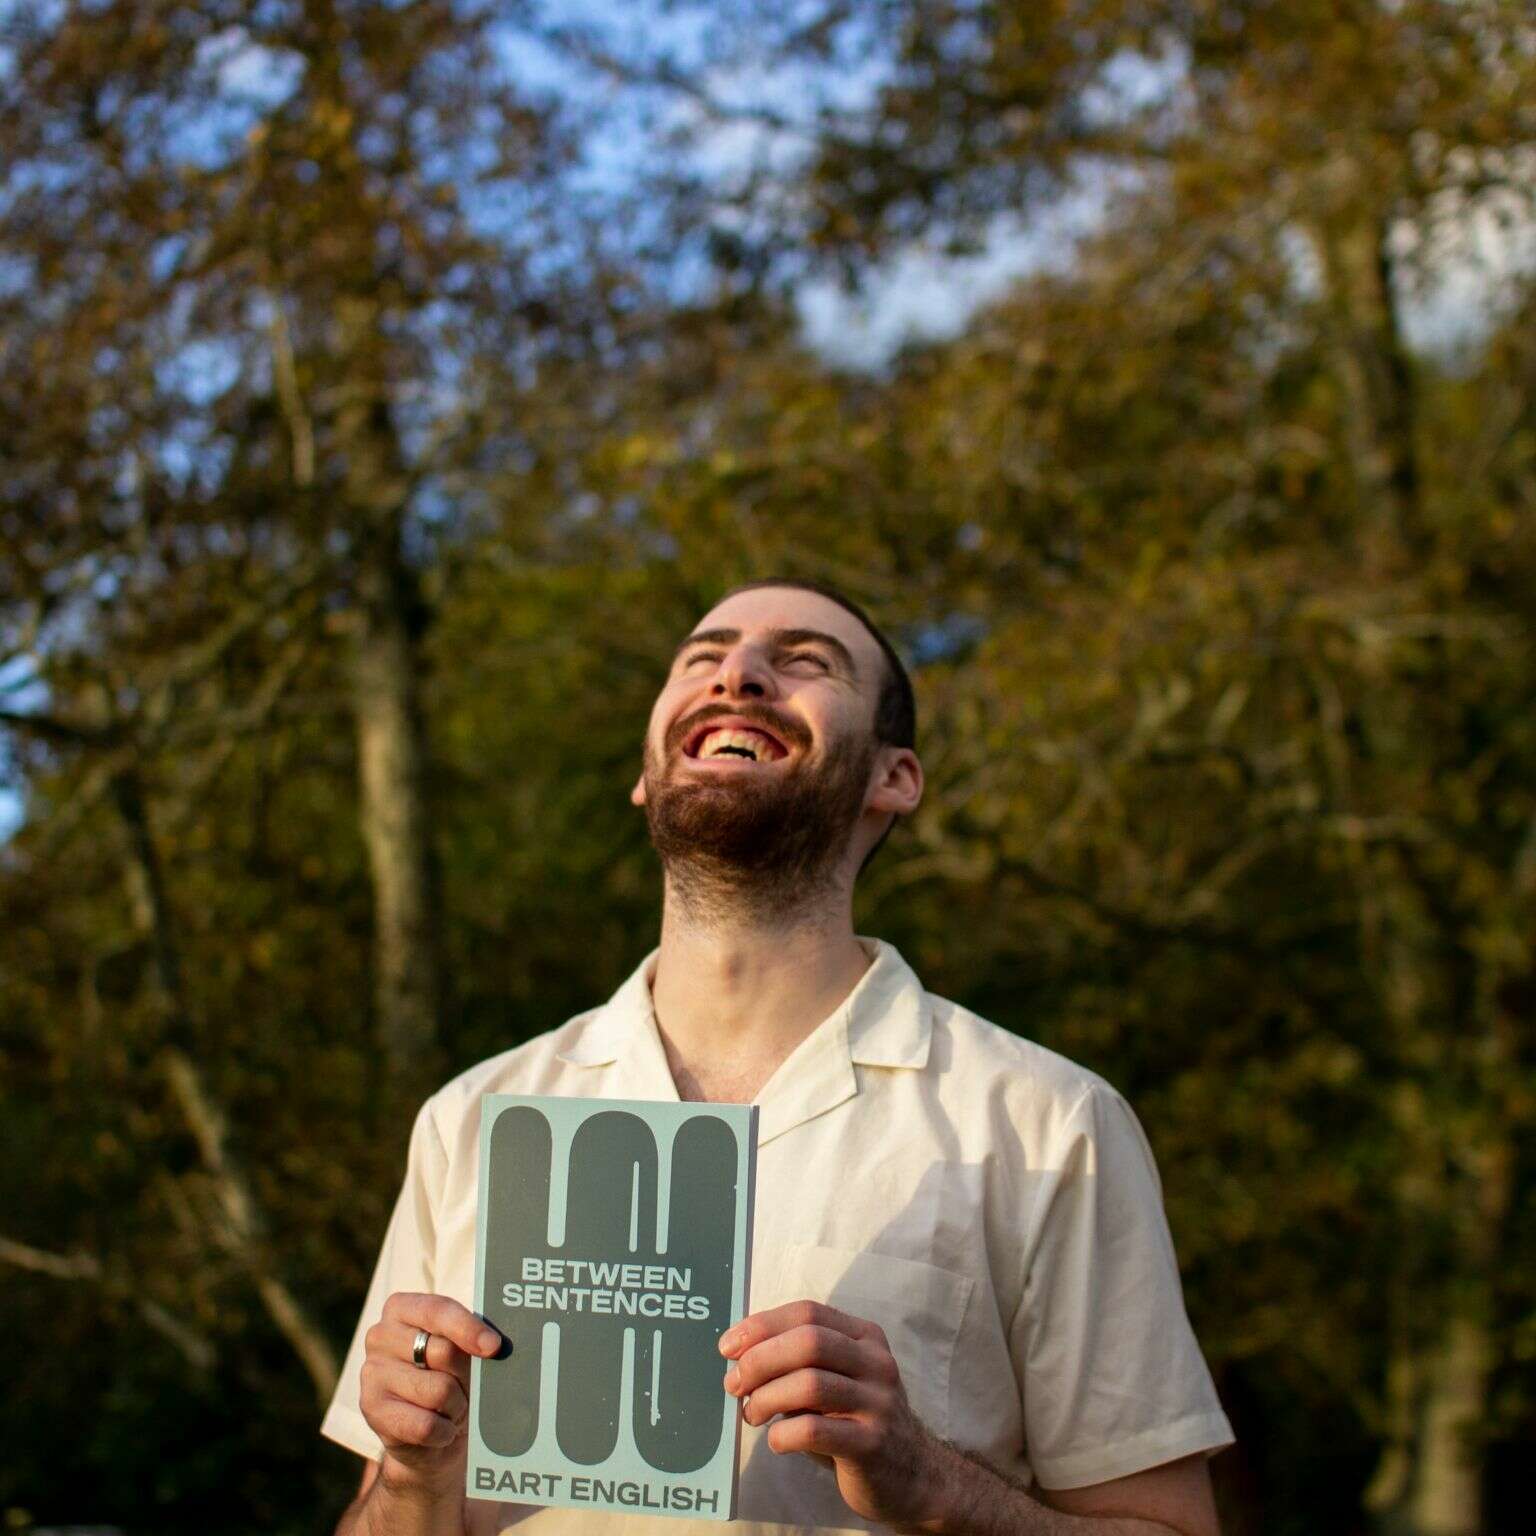 Bart has short, cropped hair and a beard, he looks up smiling holding his book cover. He's in front of some trees